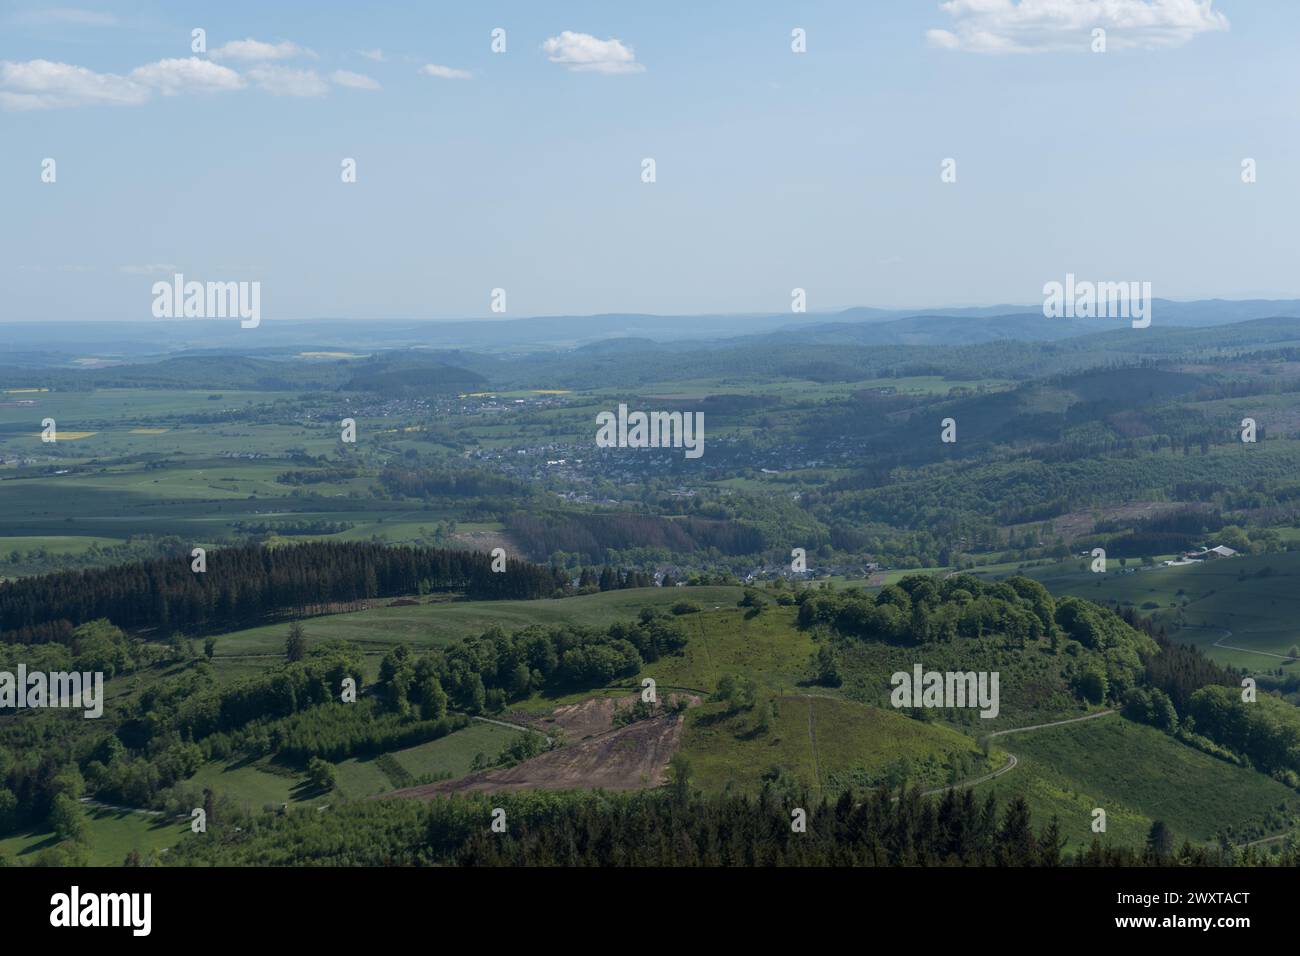 View from the tower called Bollerbergturm in the germany area Rothaargebirge Stock Photo